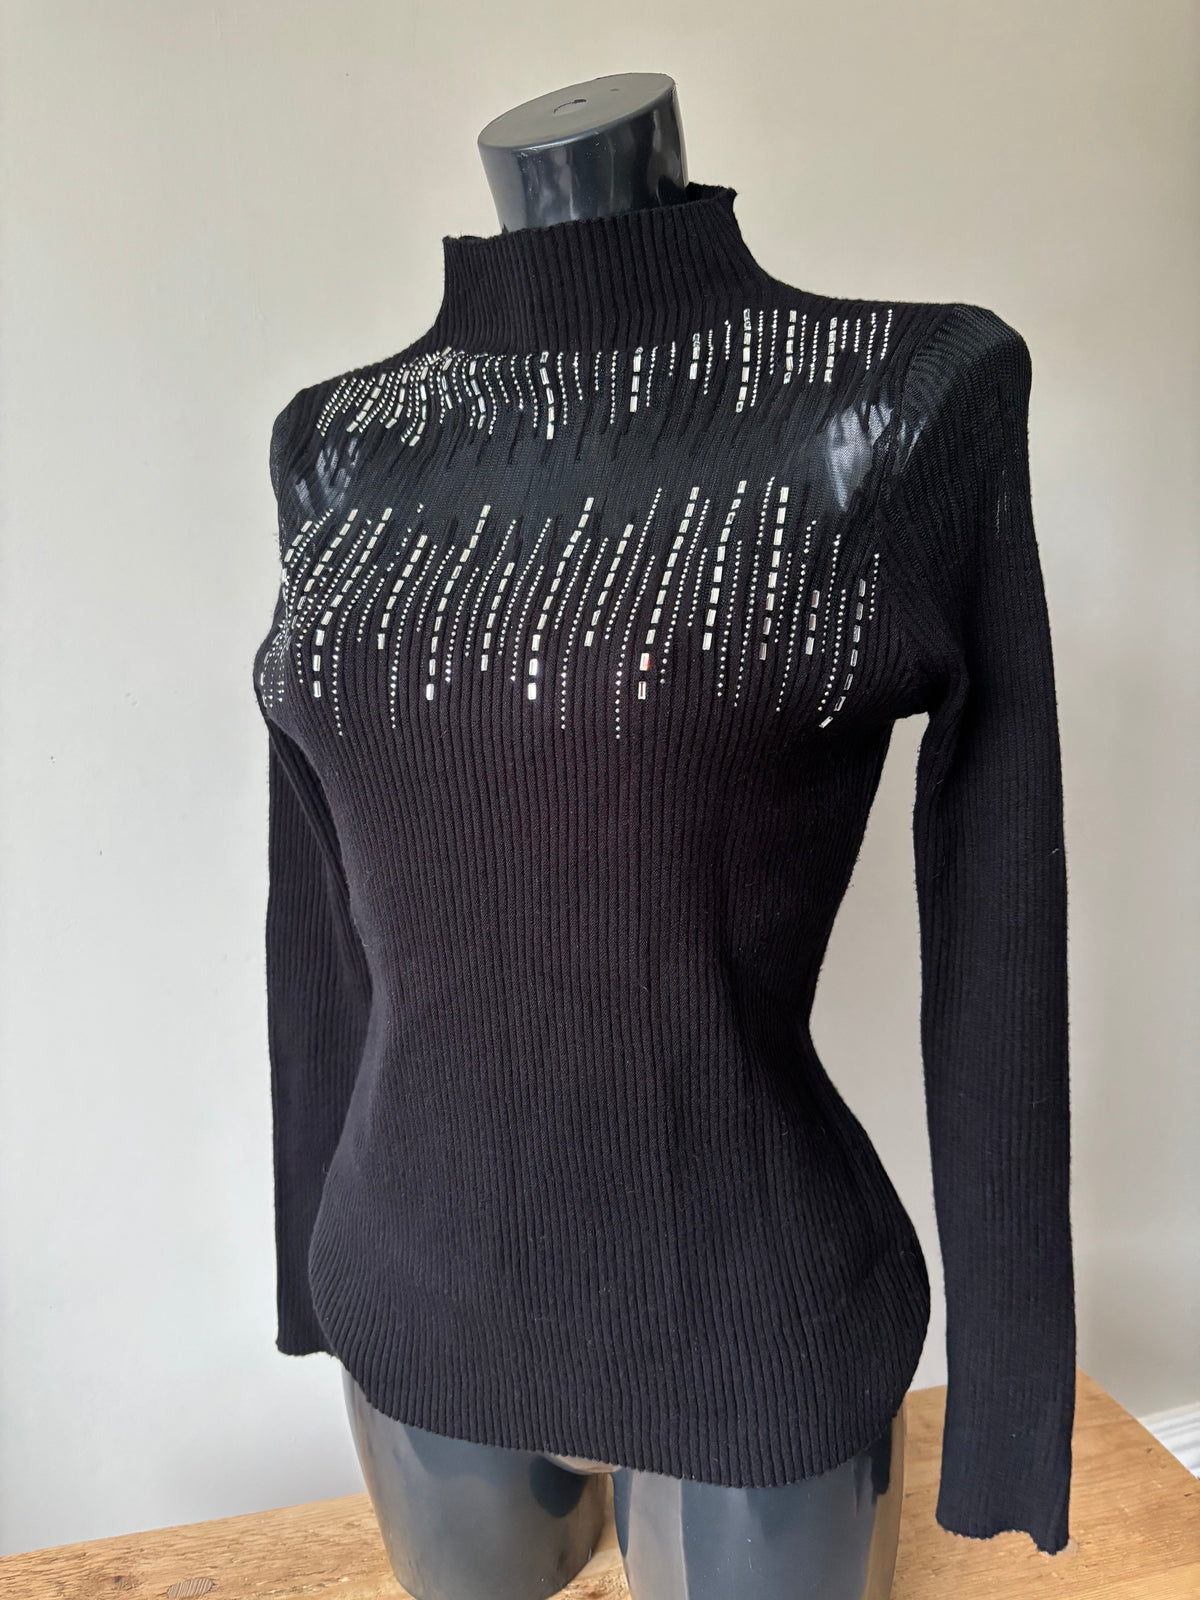 Black Knitted Diamante High Neck Jumper by Quiz Size 16